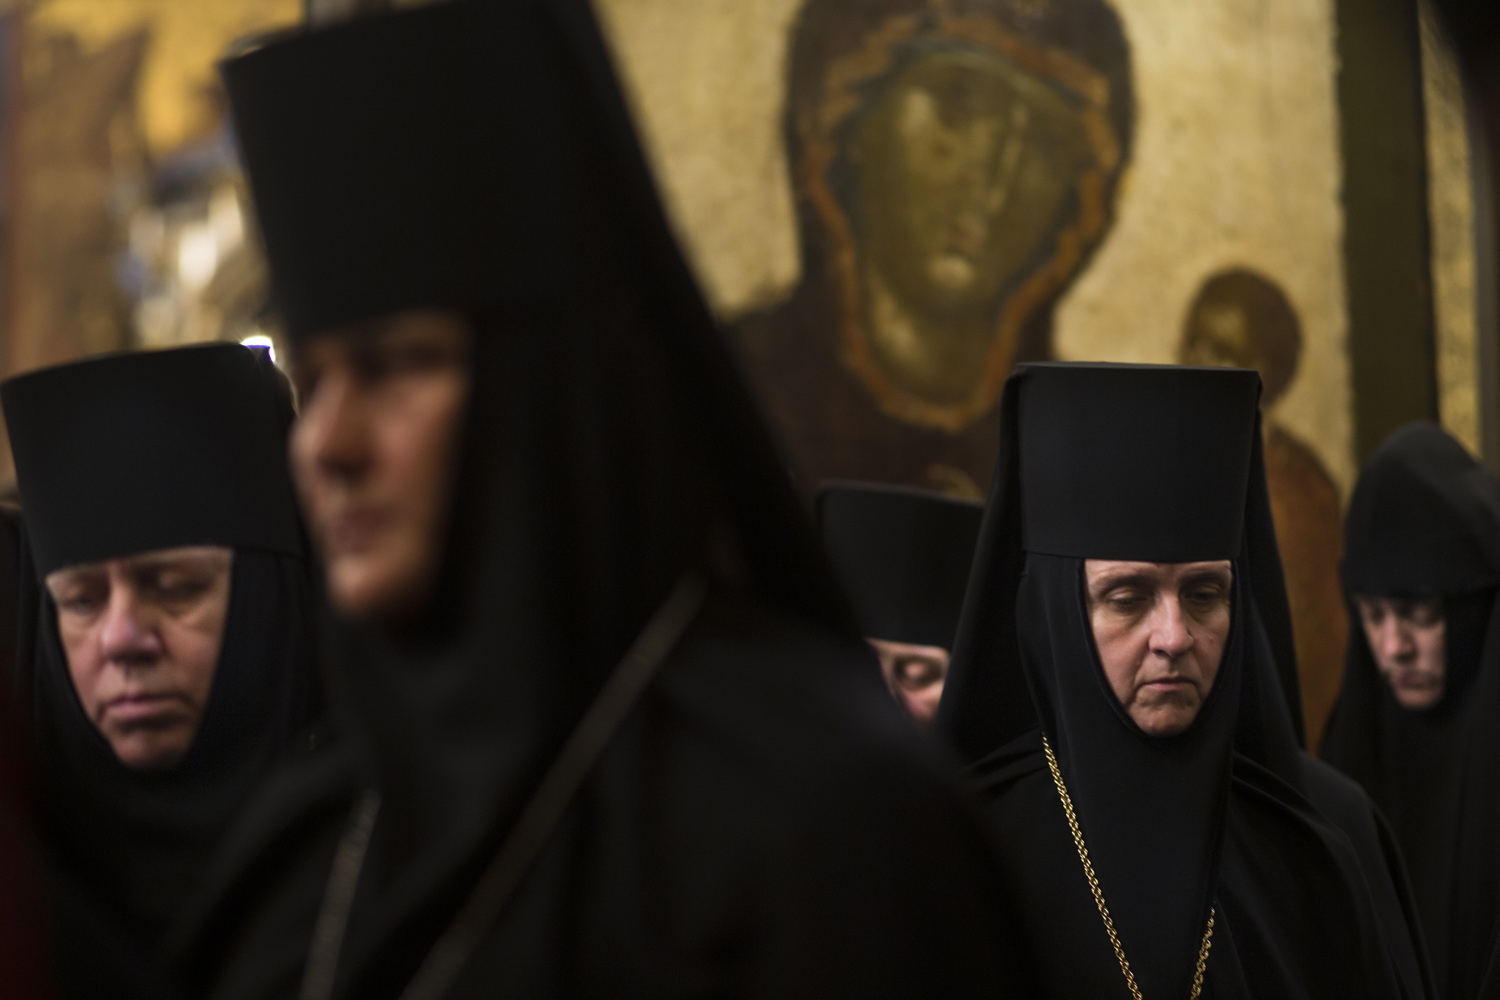 May 24, 2013. Orthodox nuns attend a service to mark the Day of St. Cyril and Methodius, founders of the Cyrillic alphabet, inside the Cathedral of the Assumption, Cathedral Square in the Kremlin in Moscow.